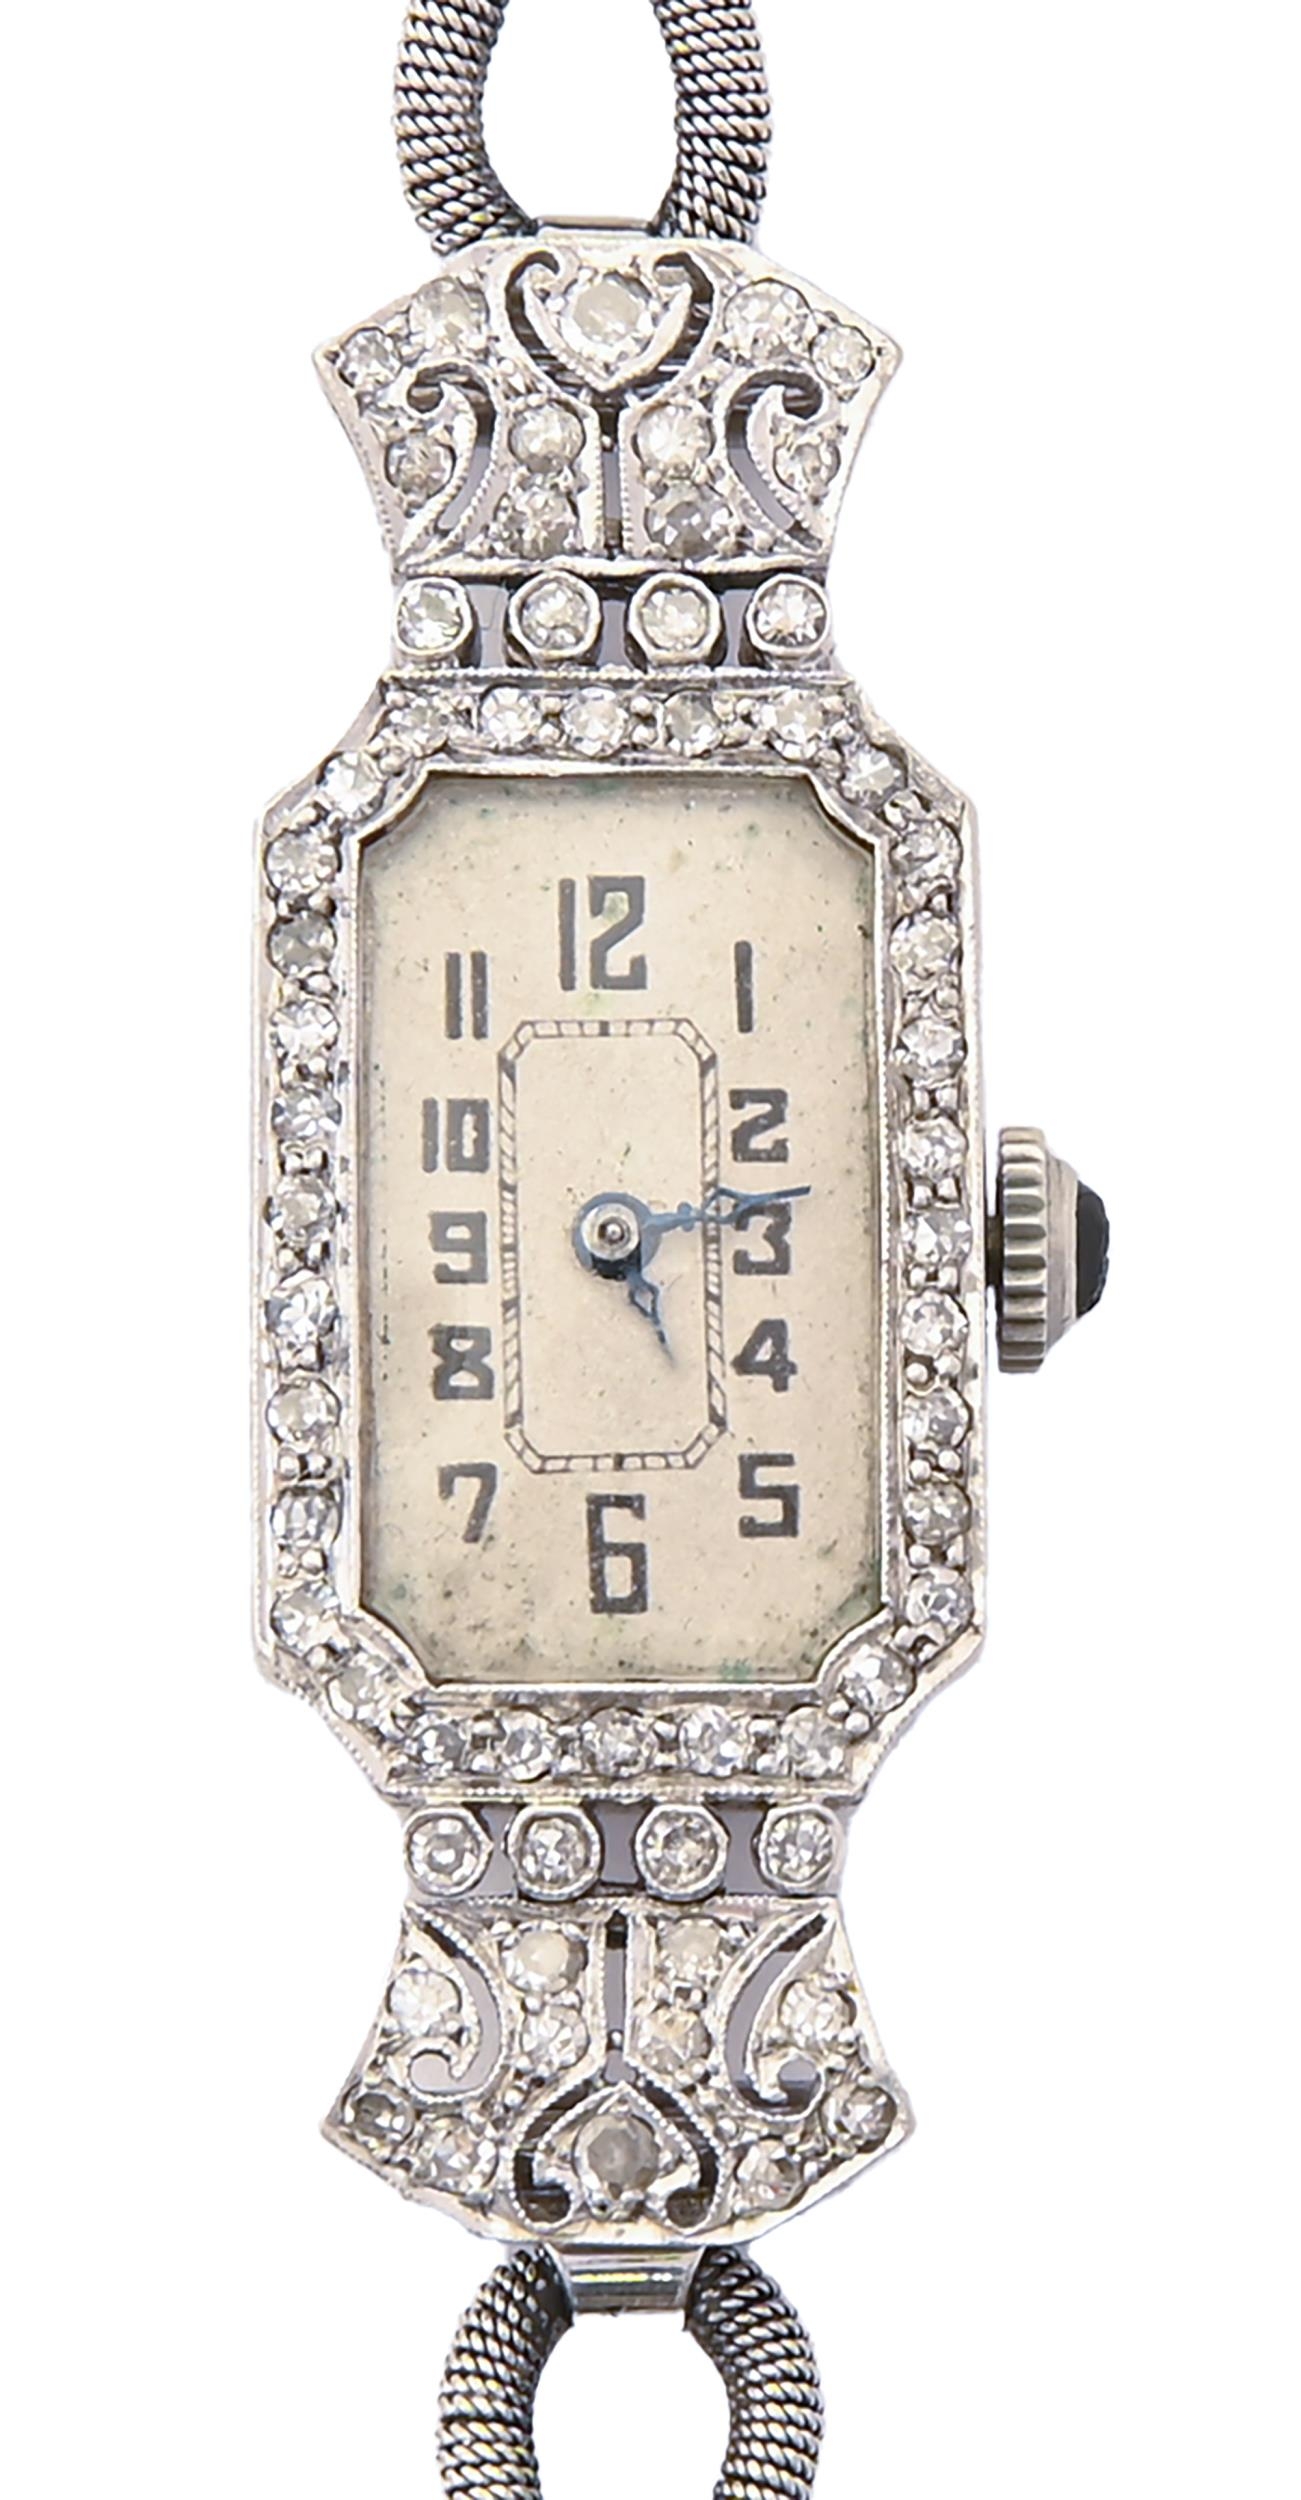 A diamond cocktail watch, c1930, pave set, the lugs articulated, in platinum, 14 x 40mm, on looped